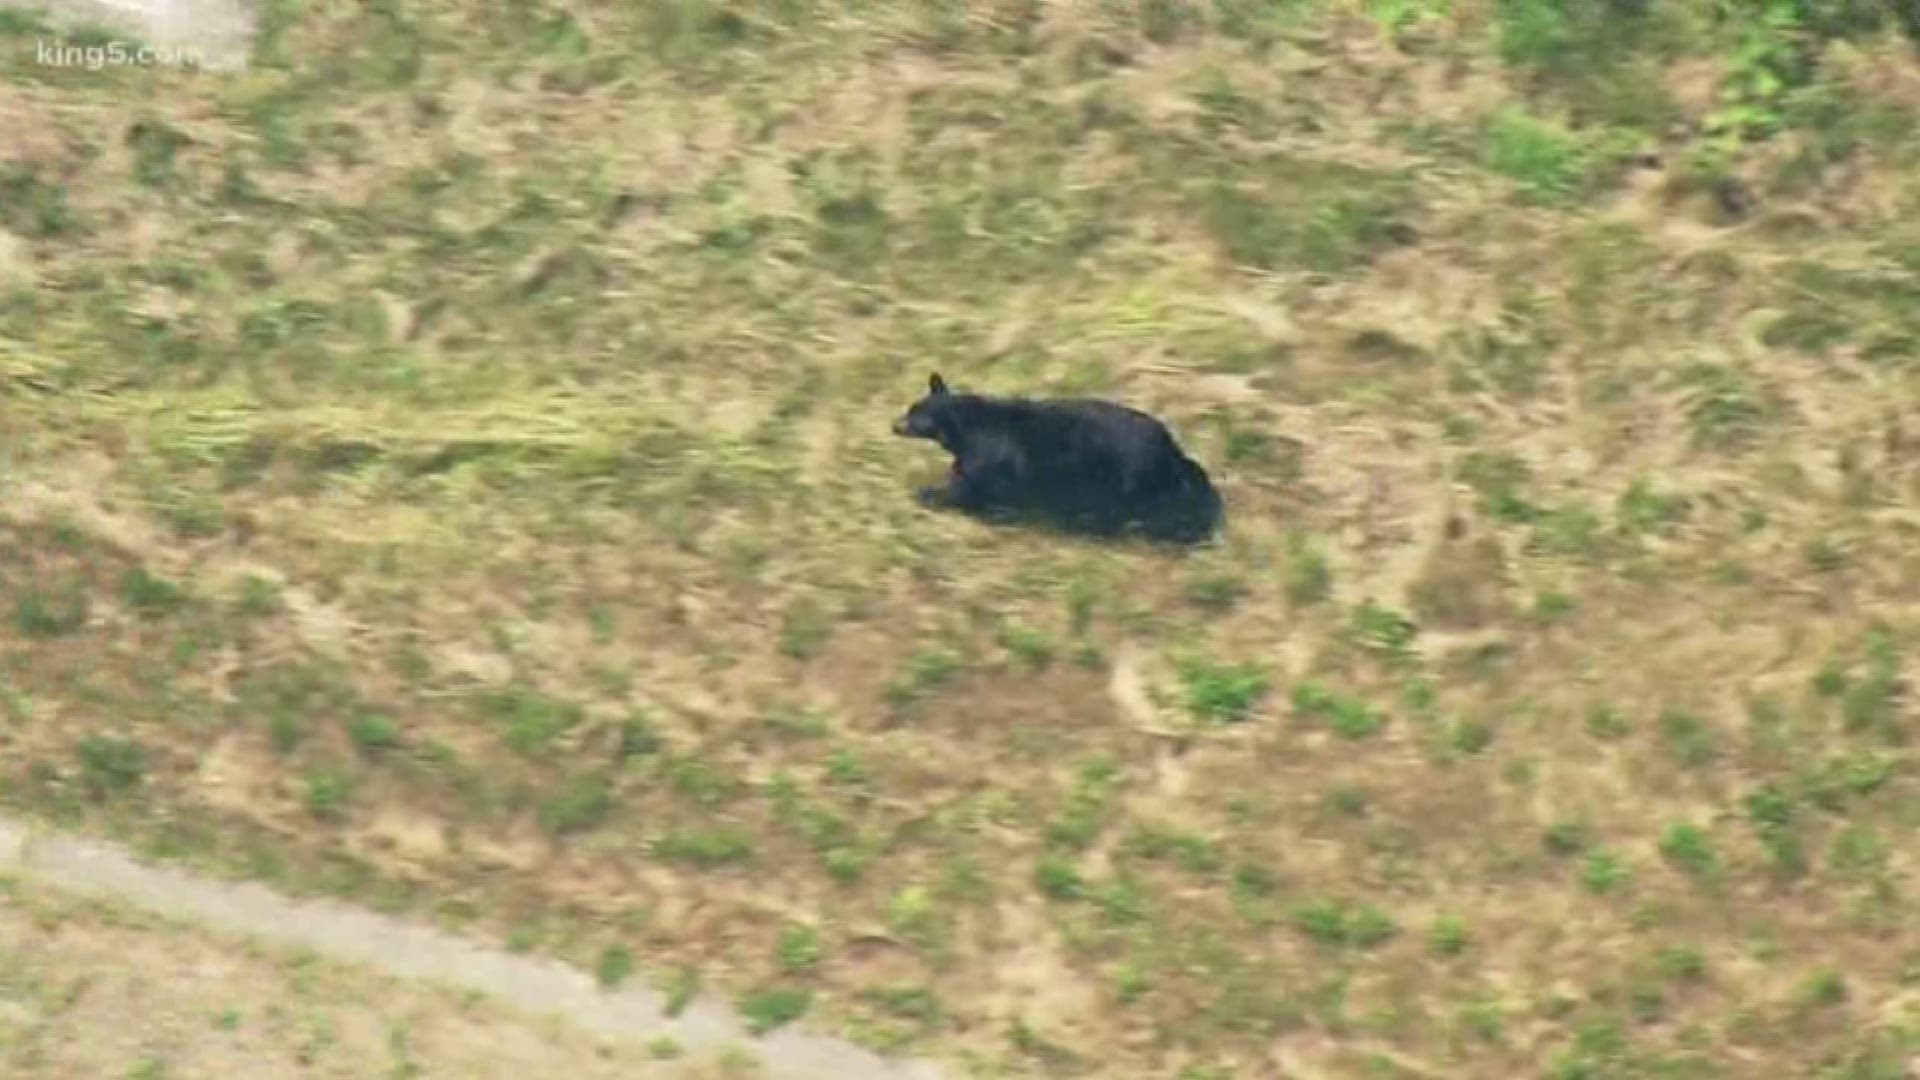 A black bear was spotted running through neighborhoods, yards, and near busy roads in Factoria Monday afternoon. KING 5's Sebastian Robertson reports.